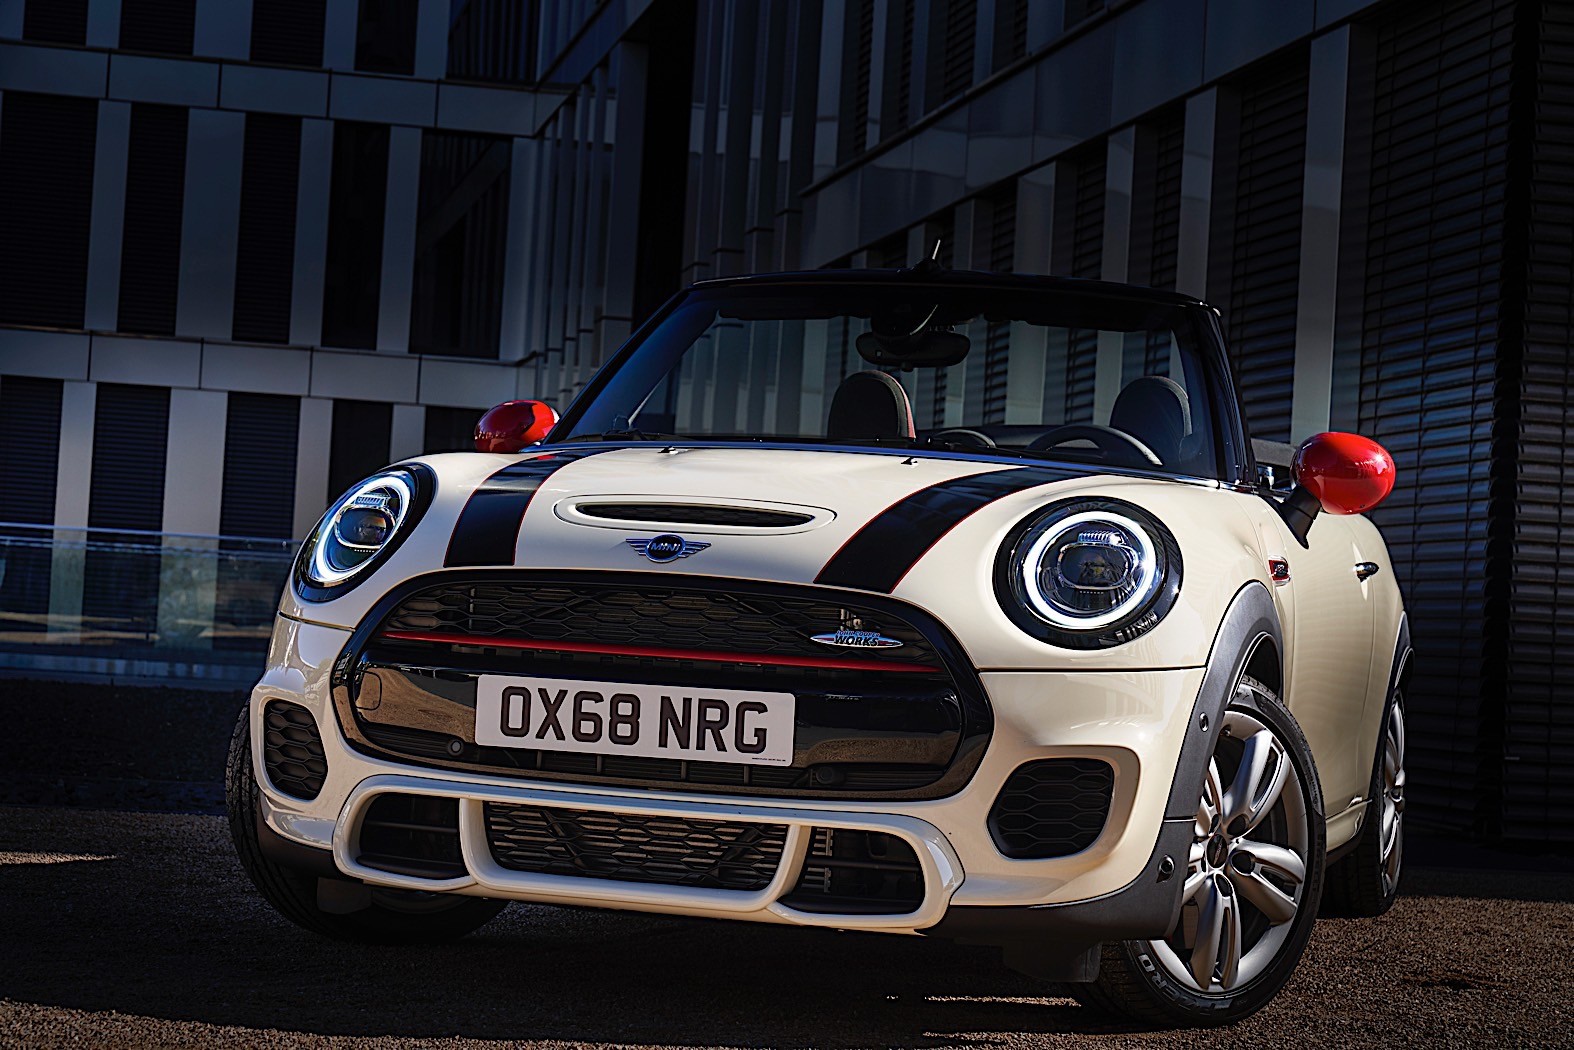 MINI John Cooper Works Comes Back as Euro 6d-TEMP Compliant Car from ...